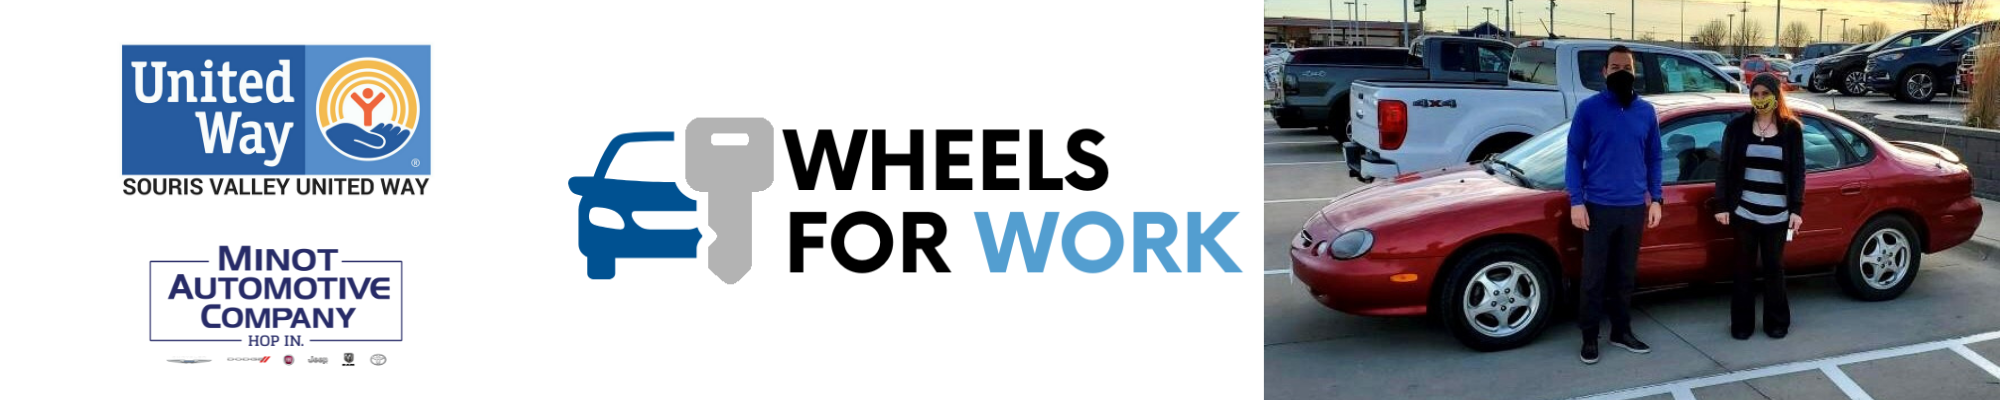 Wheels for Work Banner (Story County Picture)